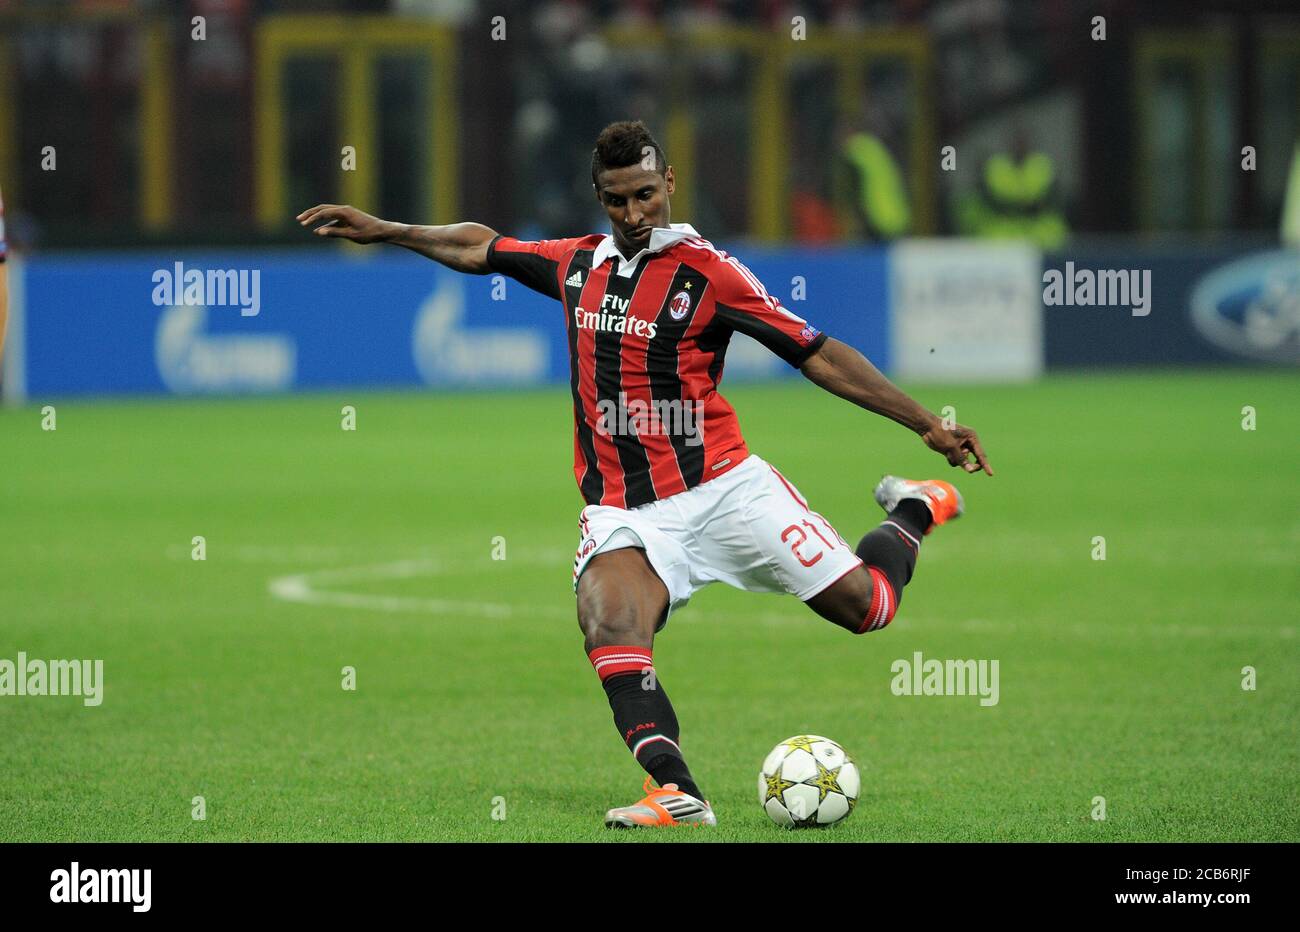 Milan  Italy, 18 September 2012,' G.Meazza'  Stadium, UEFA Champions League 2012/2013 ,AC Milan - RSC Anderlecht : Kevin Constant in action during the match Stock Photo